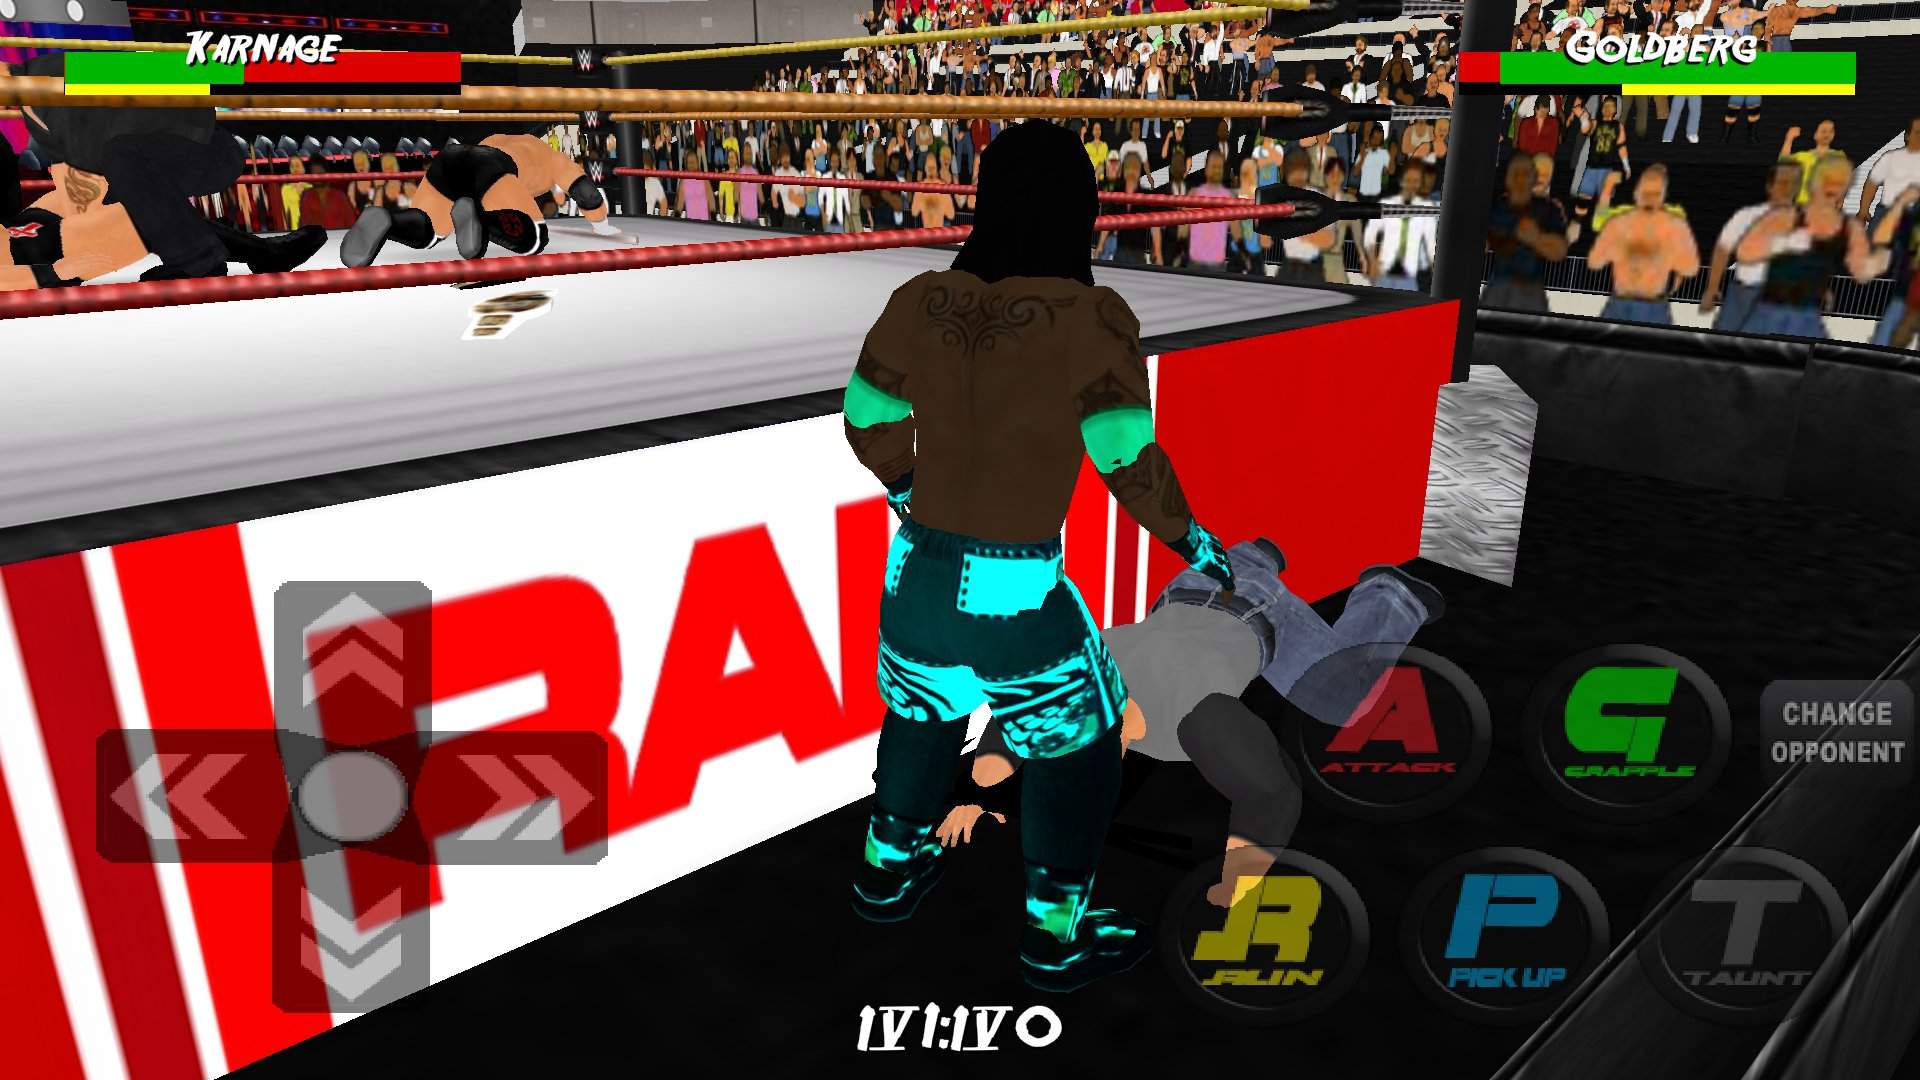 wr3d 2k19 mod download for android